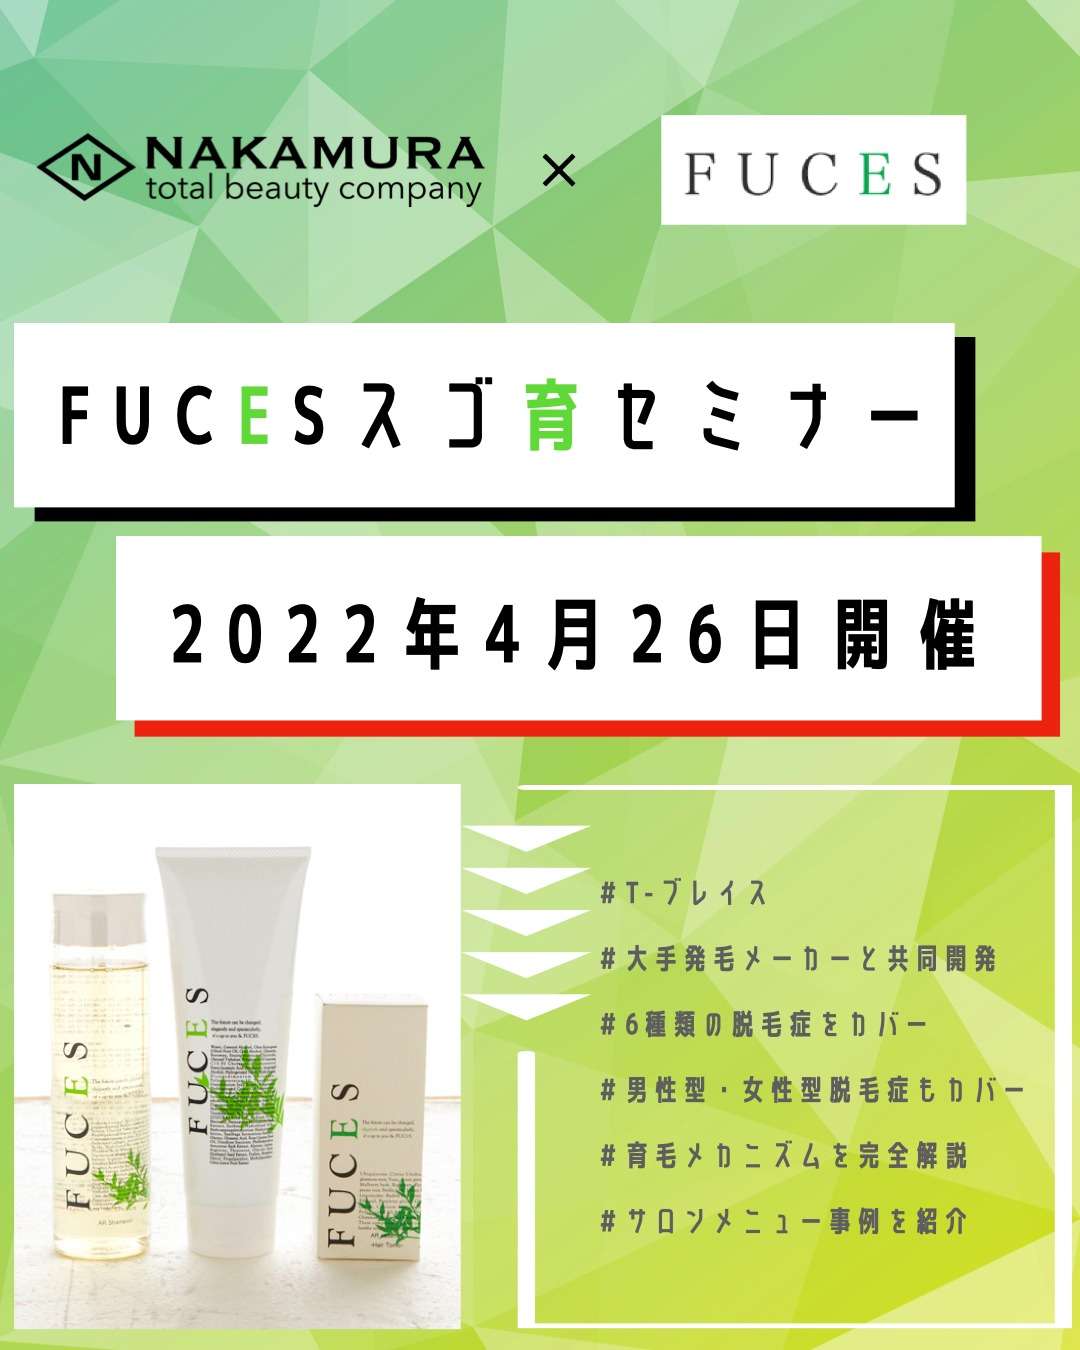 【FUCES】4/26開催！！FUCES『スゴ育』セミナー